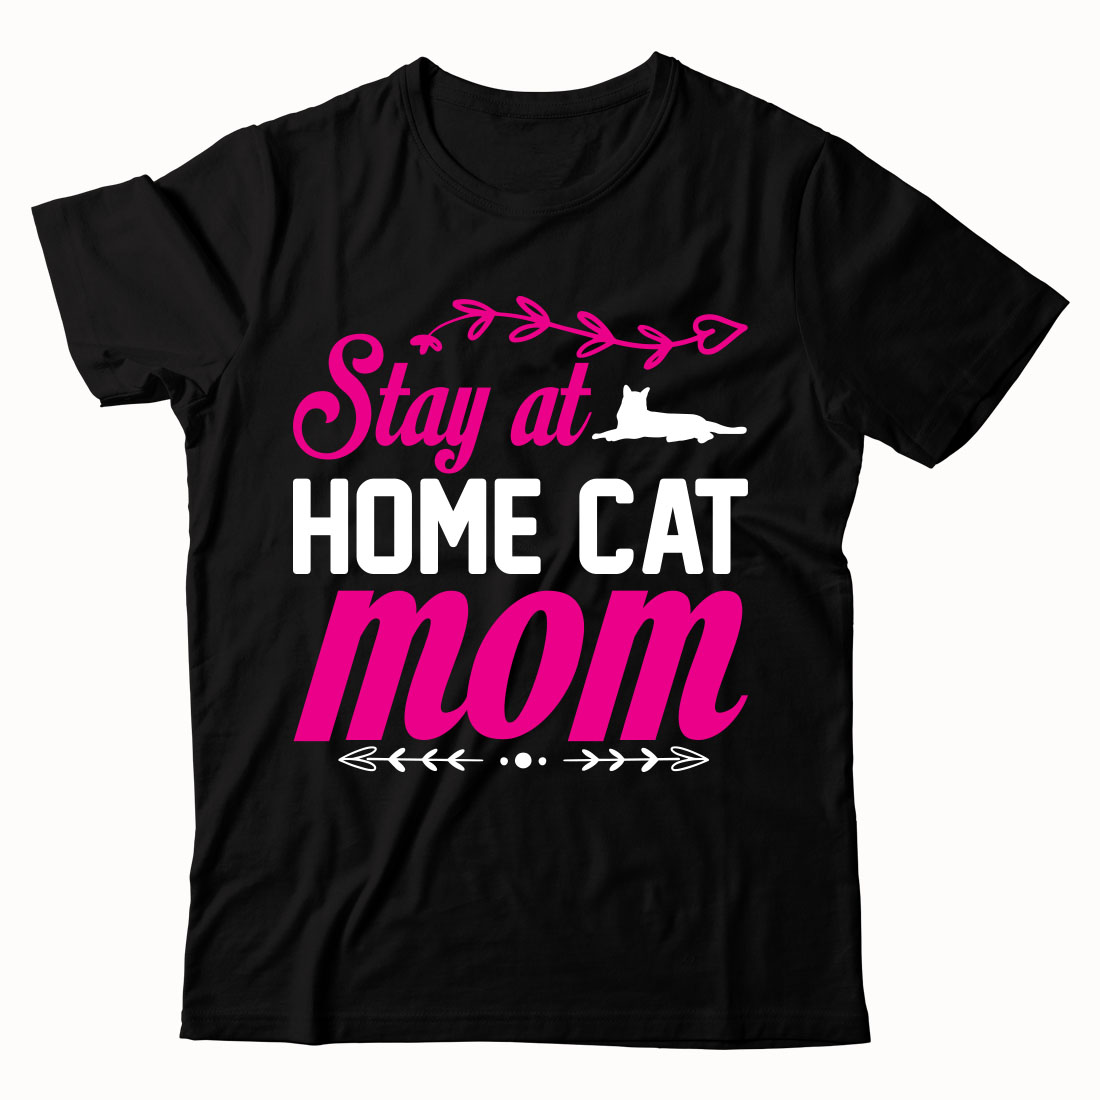 Black t - shirt that says stay at home cat mom.